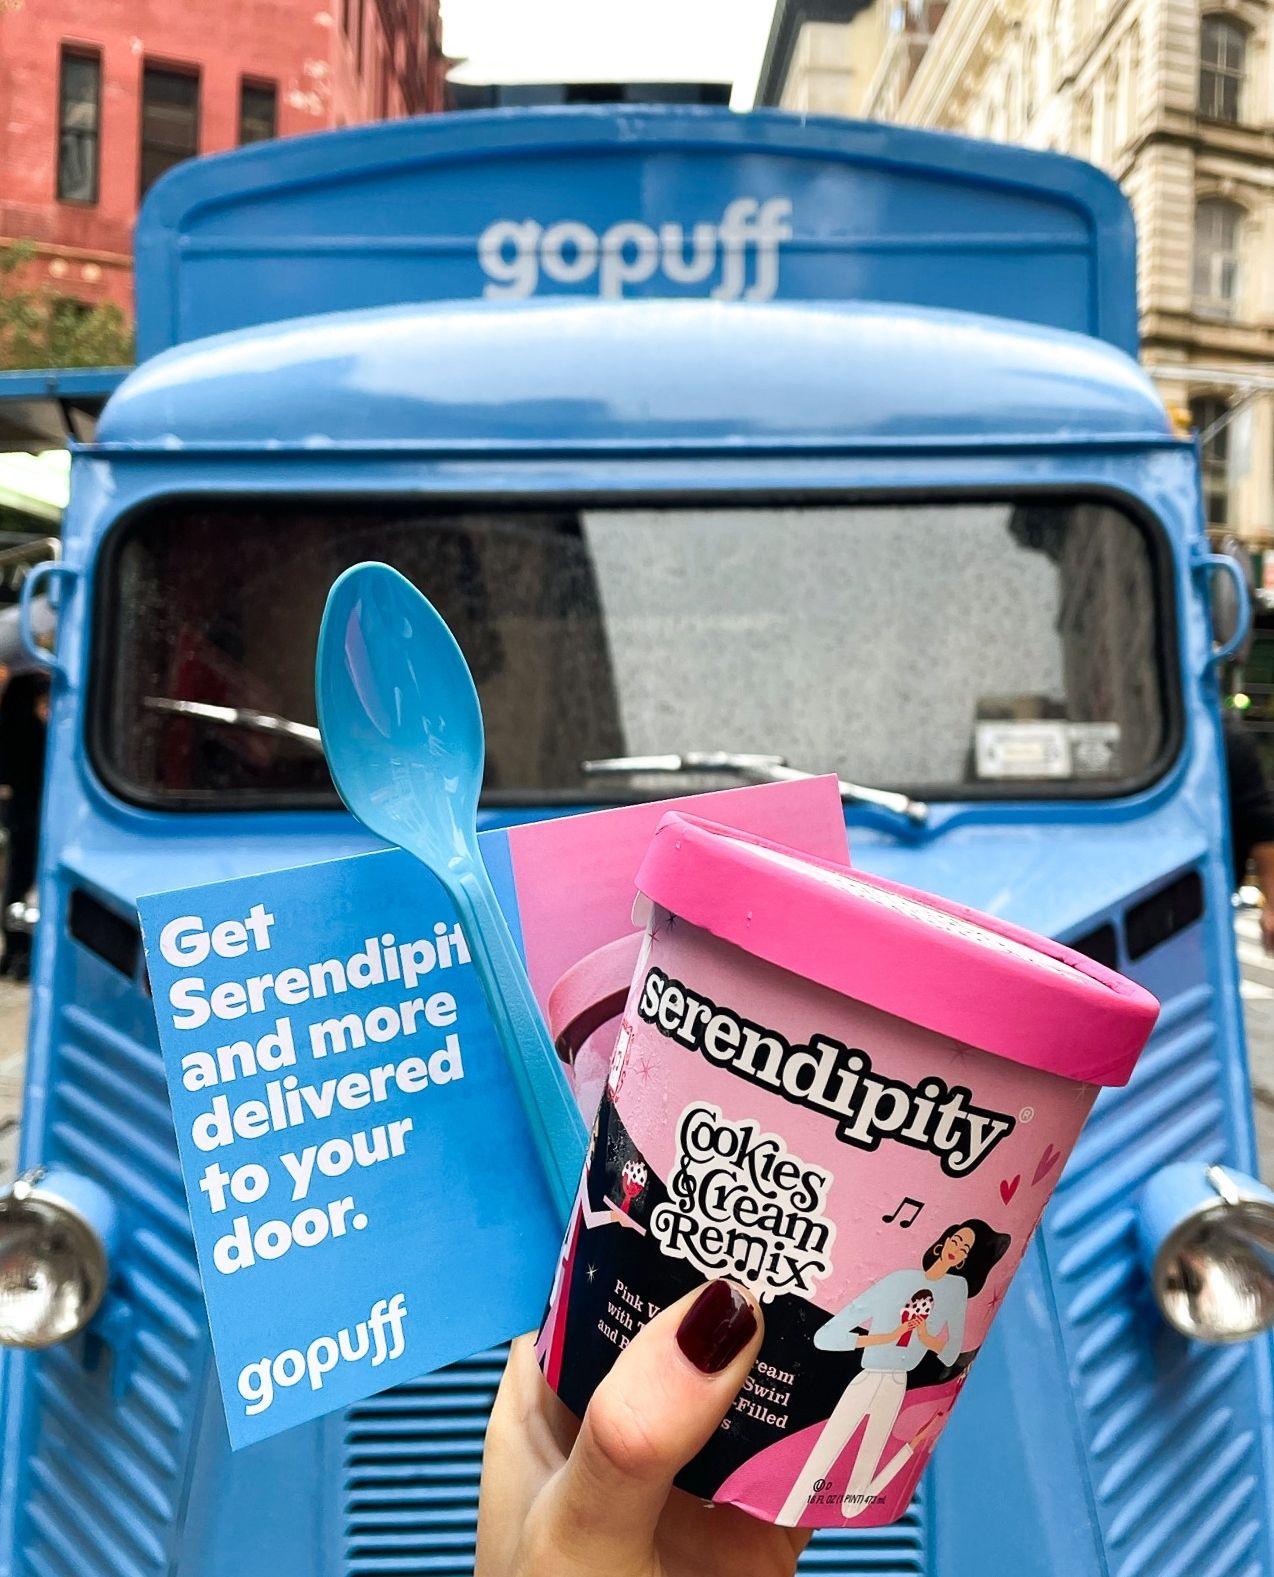 Gopuff branded vintage truck with free ice cream.